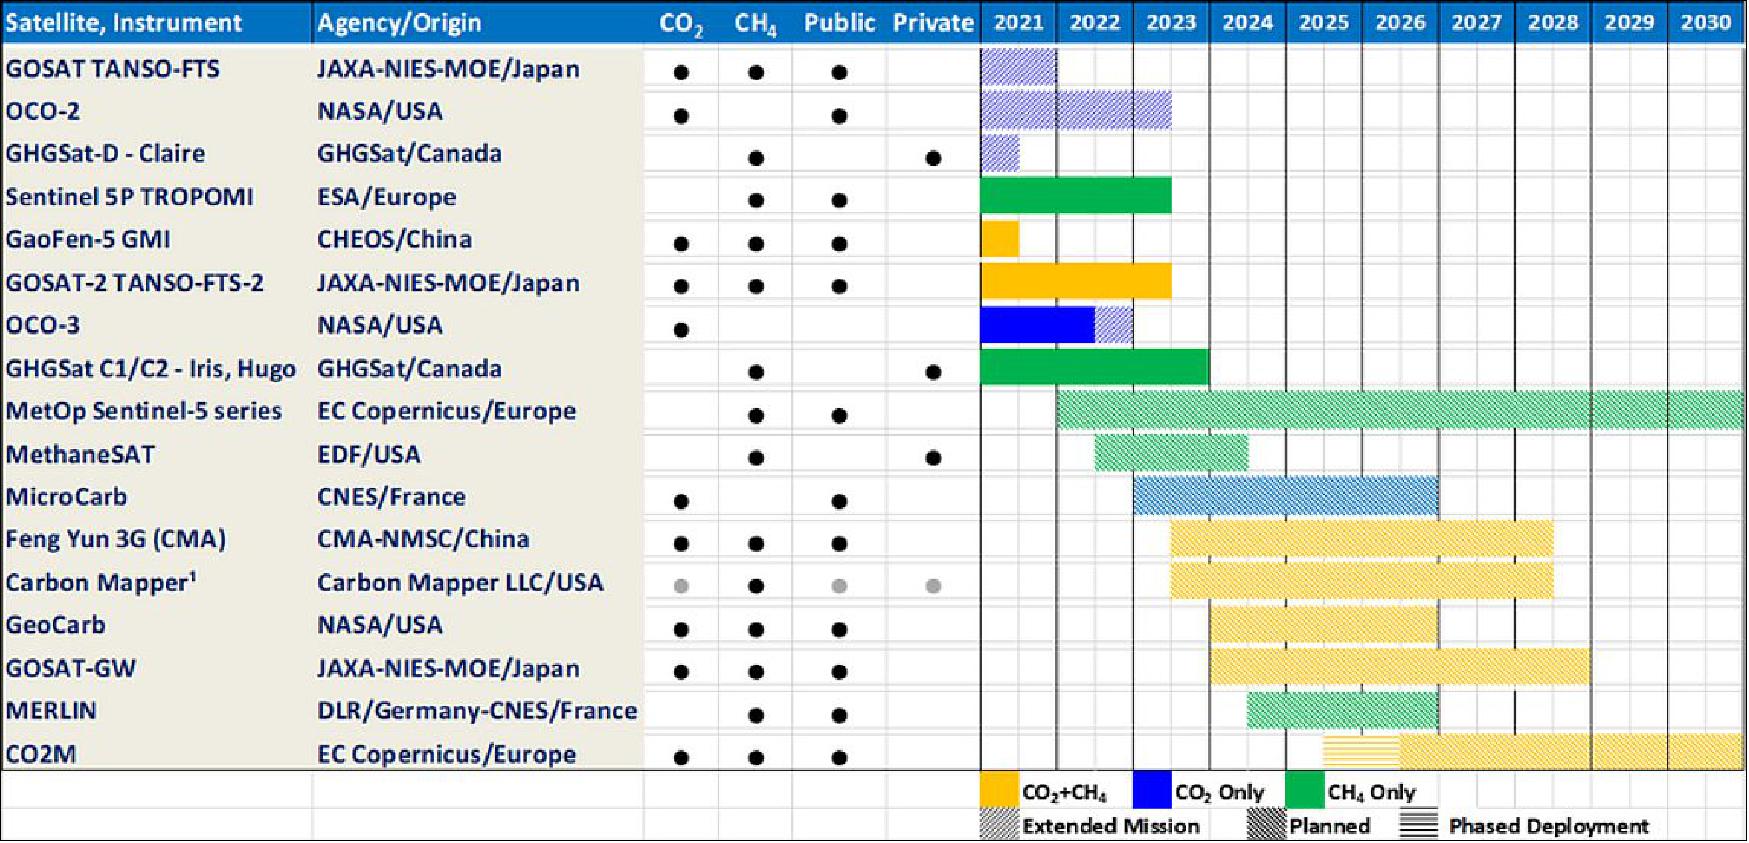 Figure 1: Overview of global GHG missions in operation and planned (image credit: SpaceNews, CEOS)